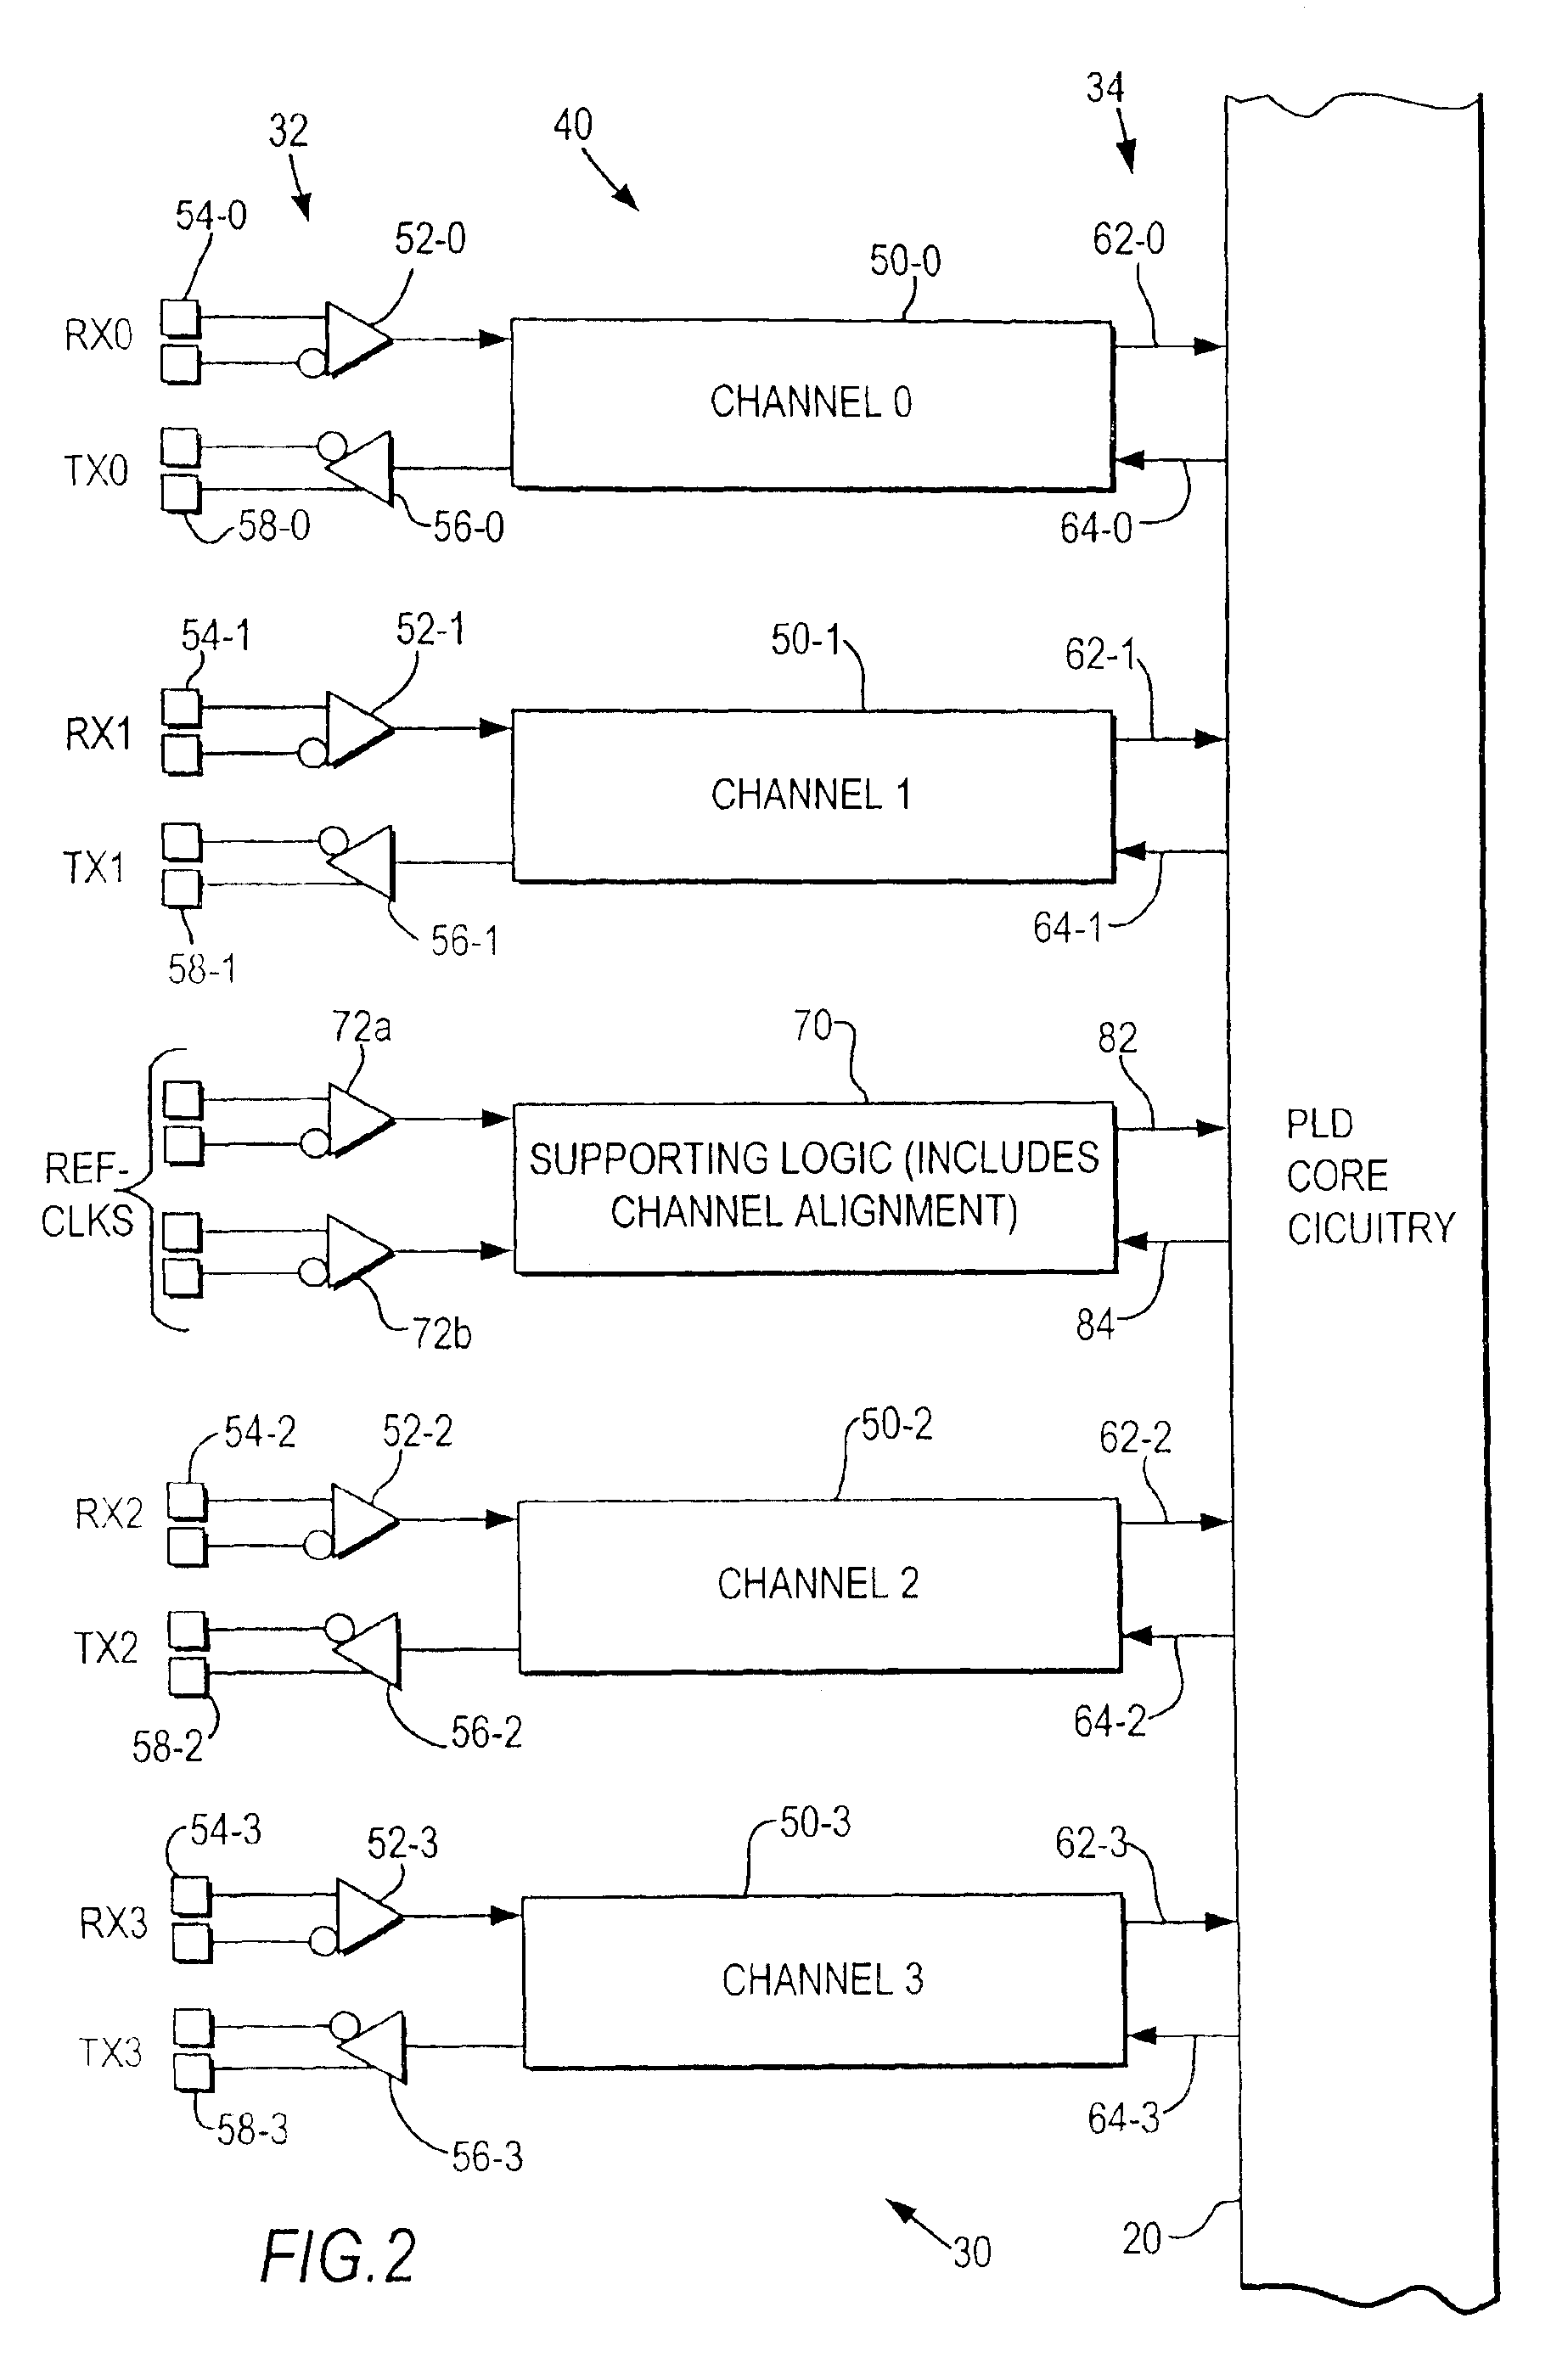 Programmable logic device with high speed serial interface circuitry